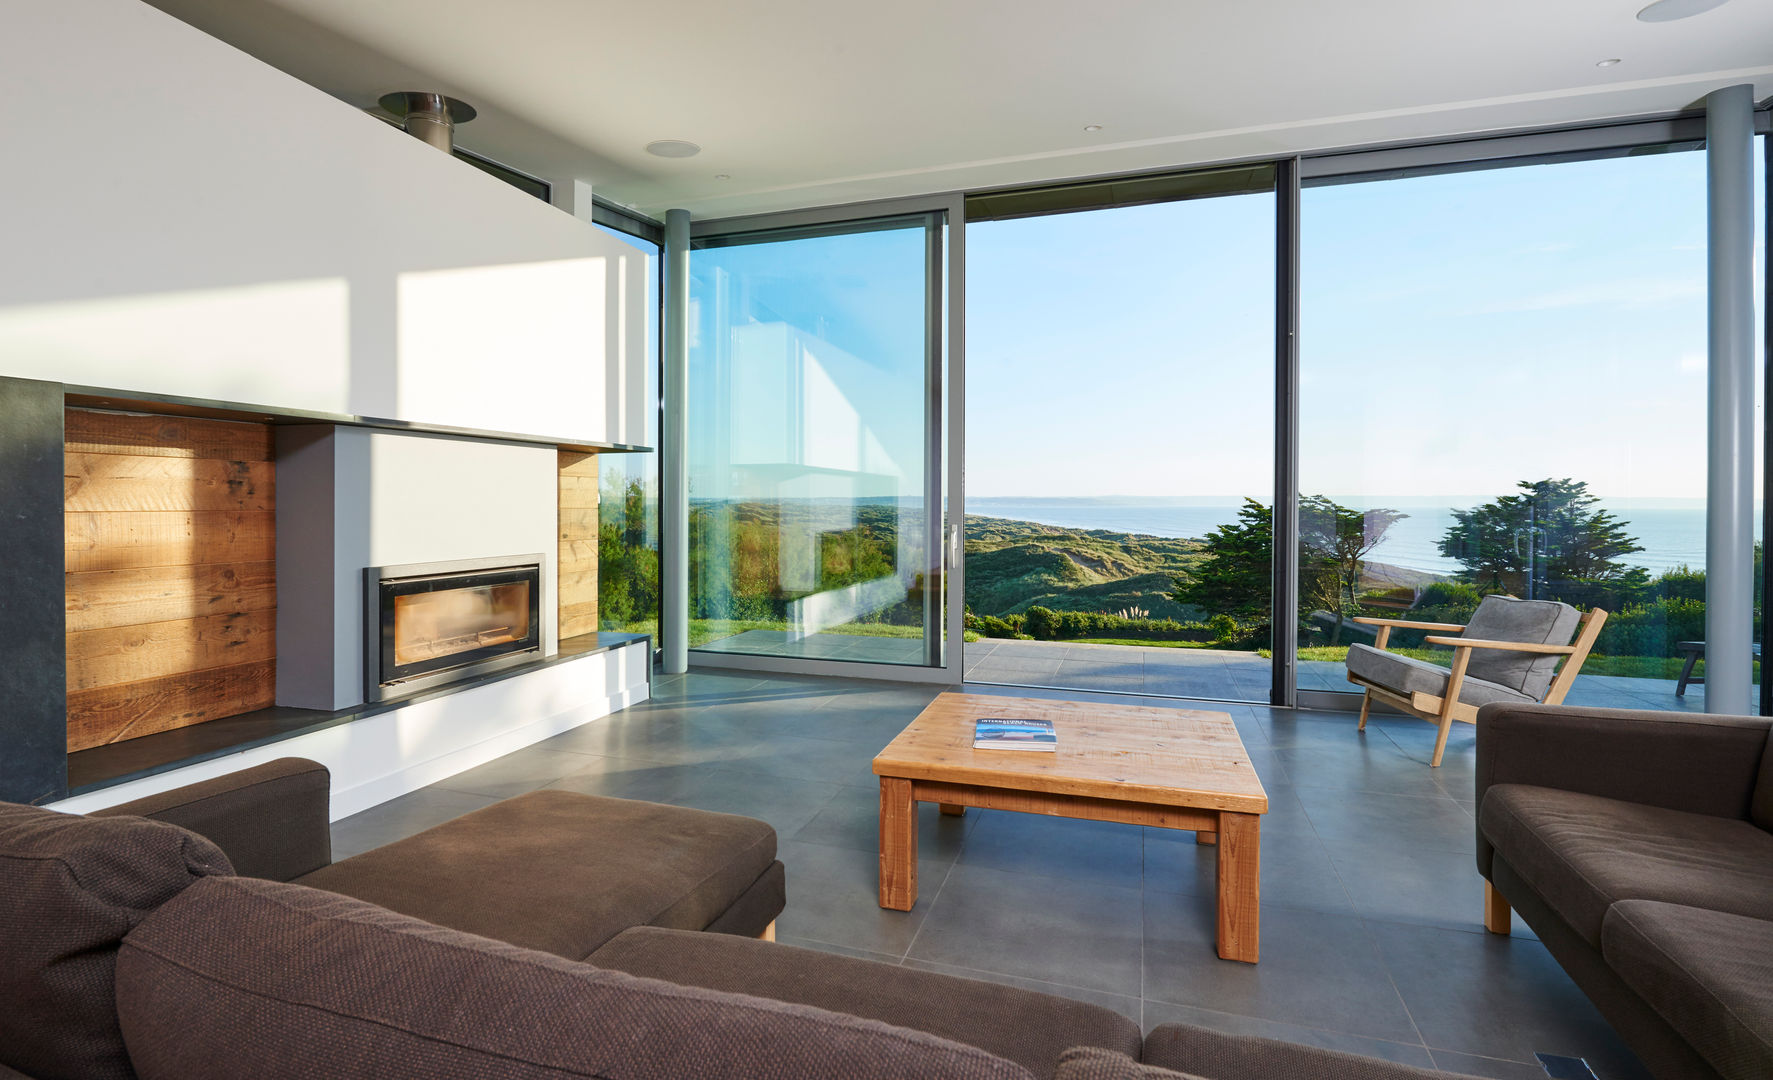 Sandhills Open Plan Living Room with Stunning Views Barc Architects Living room